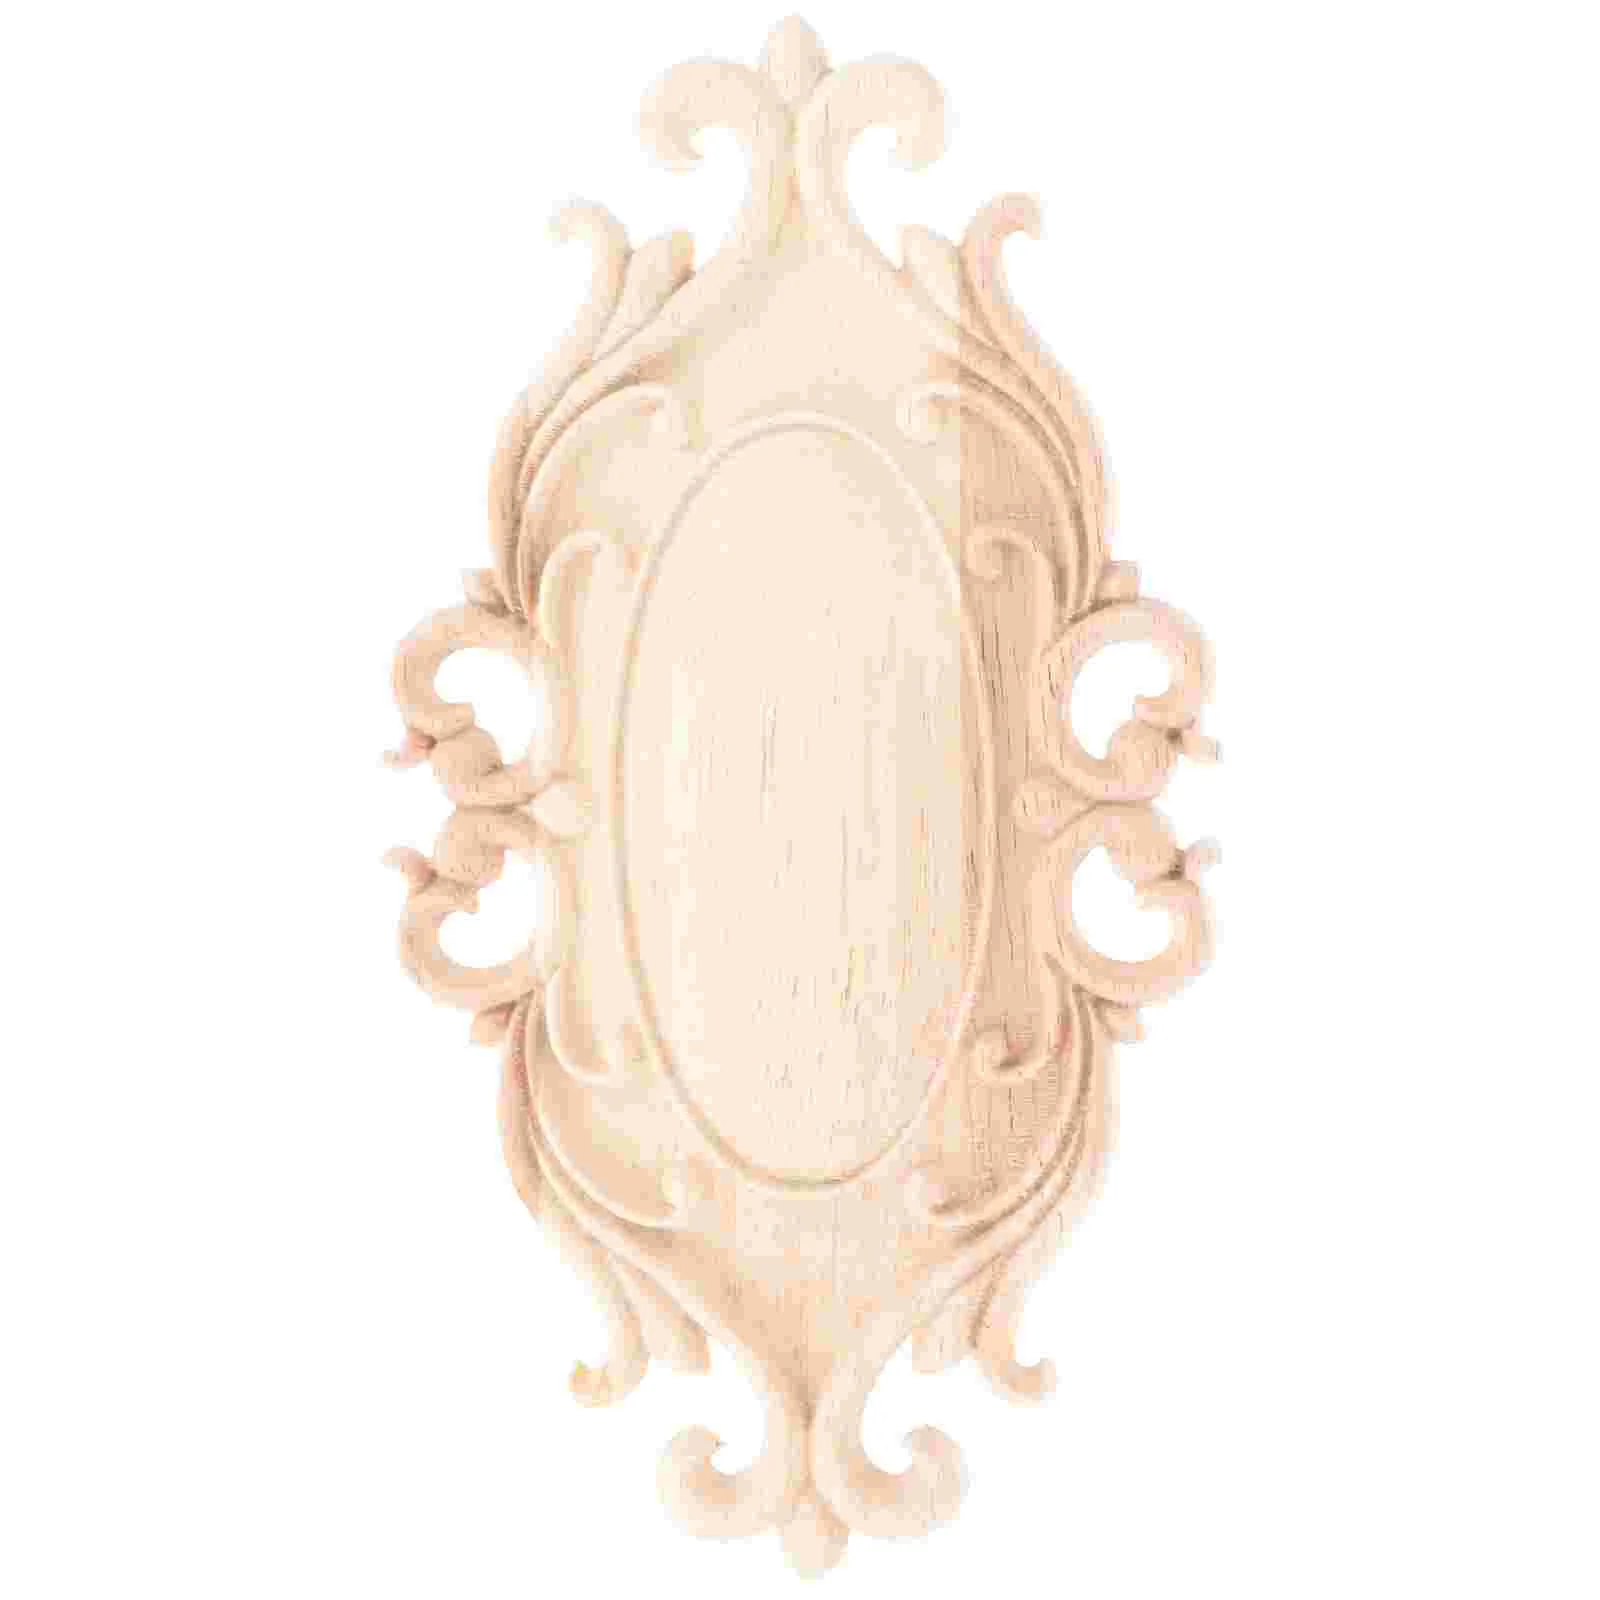 

Wood Applique Carved Appliques Furniture Onlay Decal Carving Diy Trim Corner Wall Onlays Unpainted Door Wooden Decor Frame